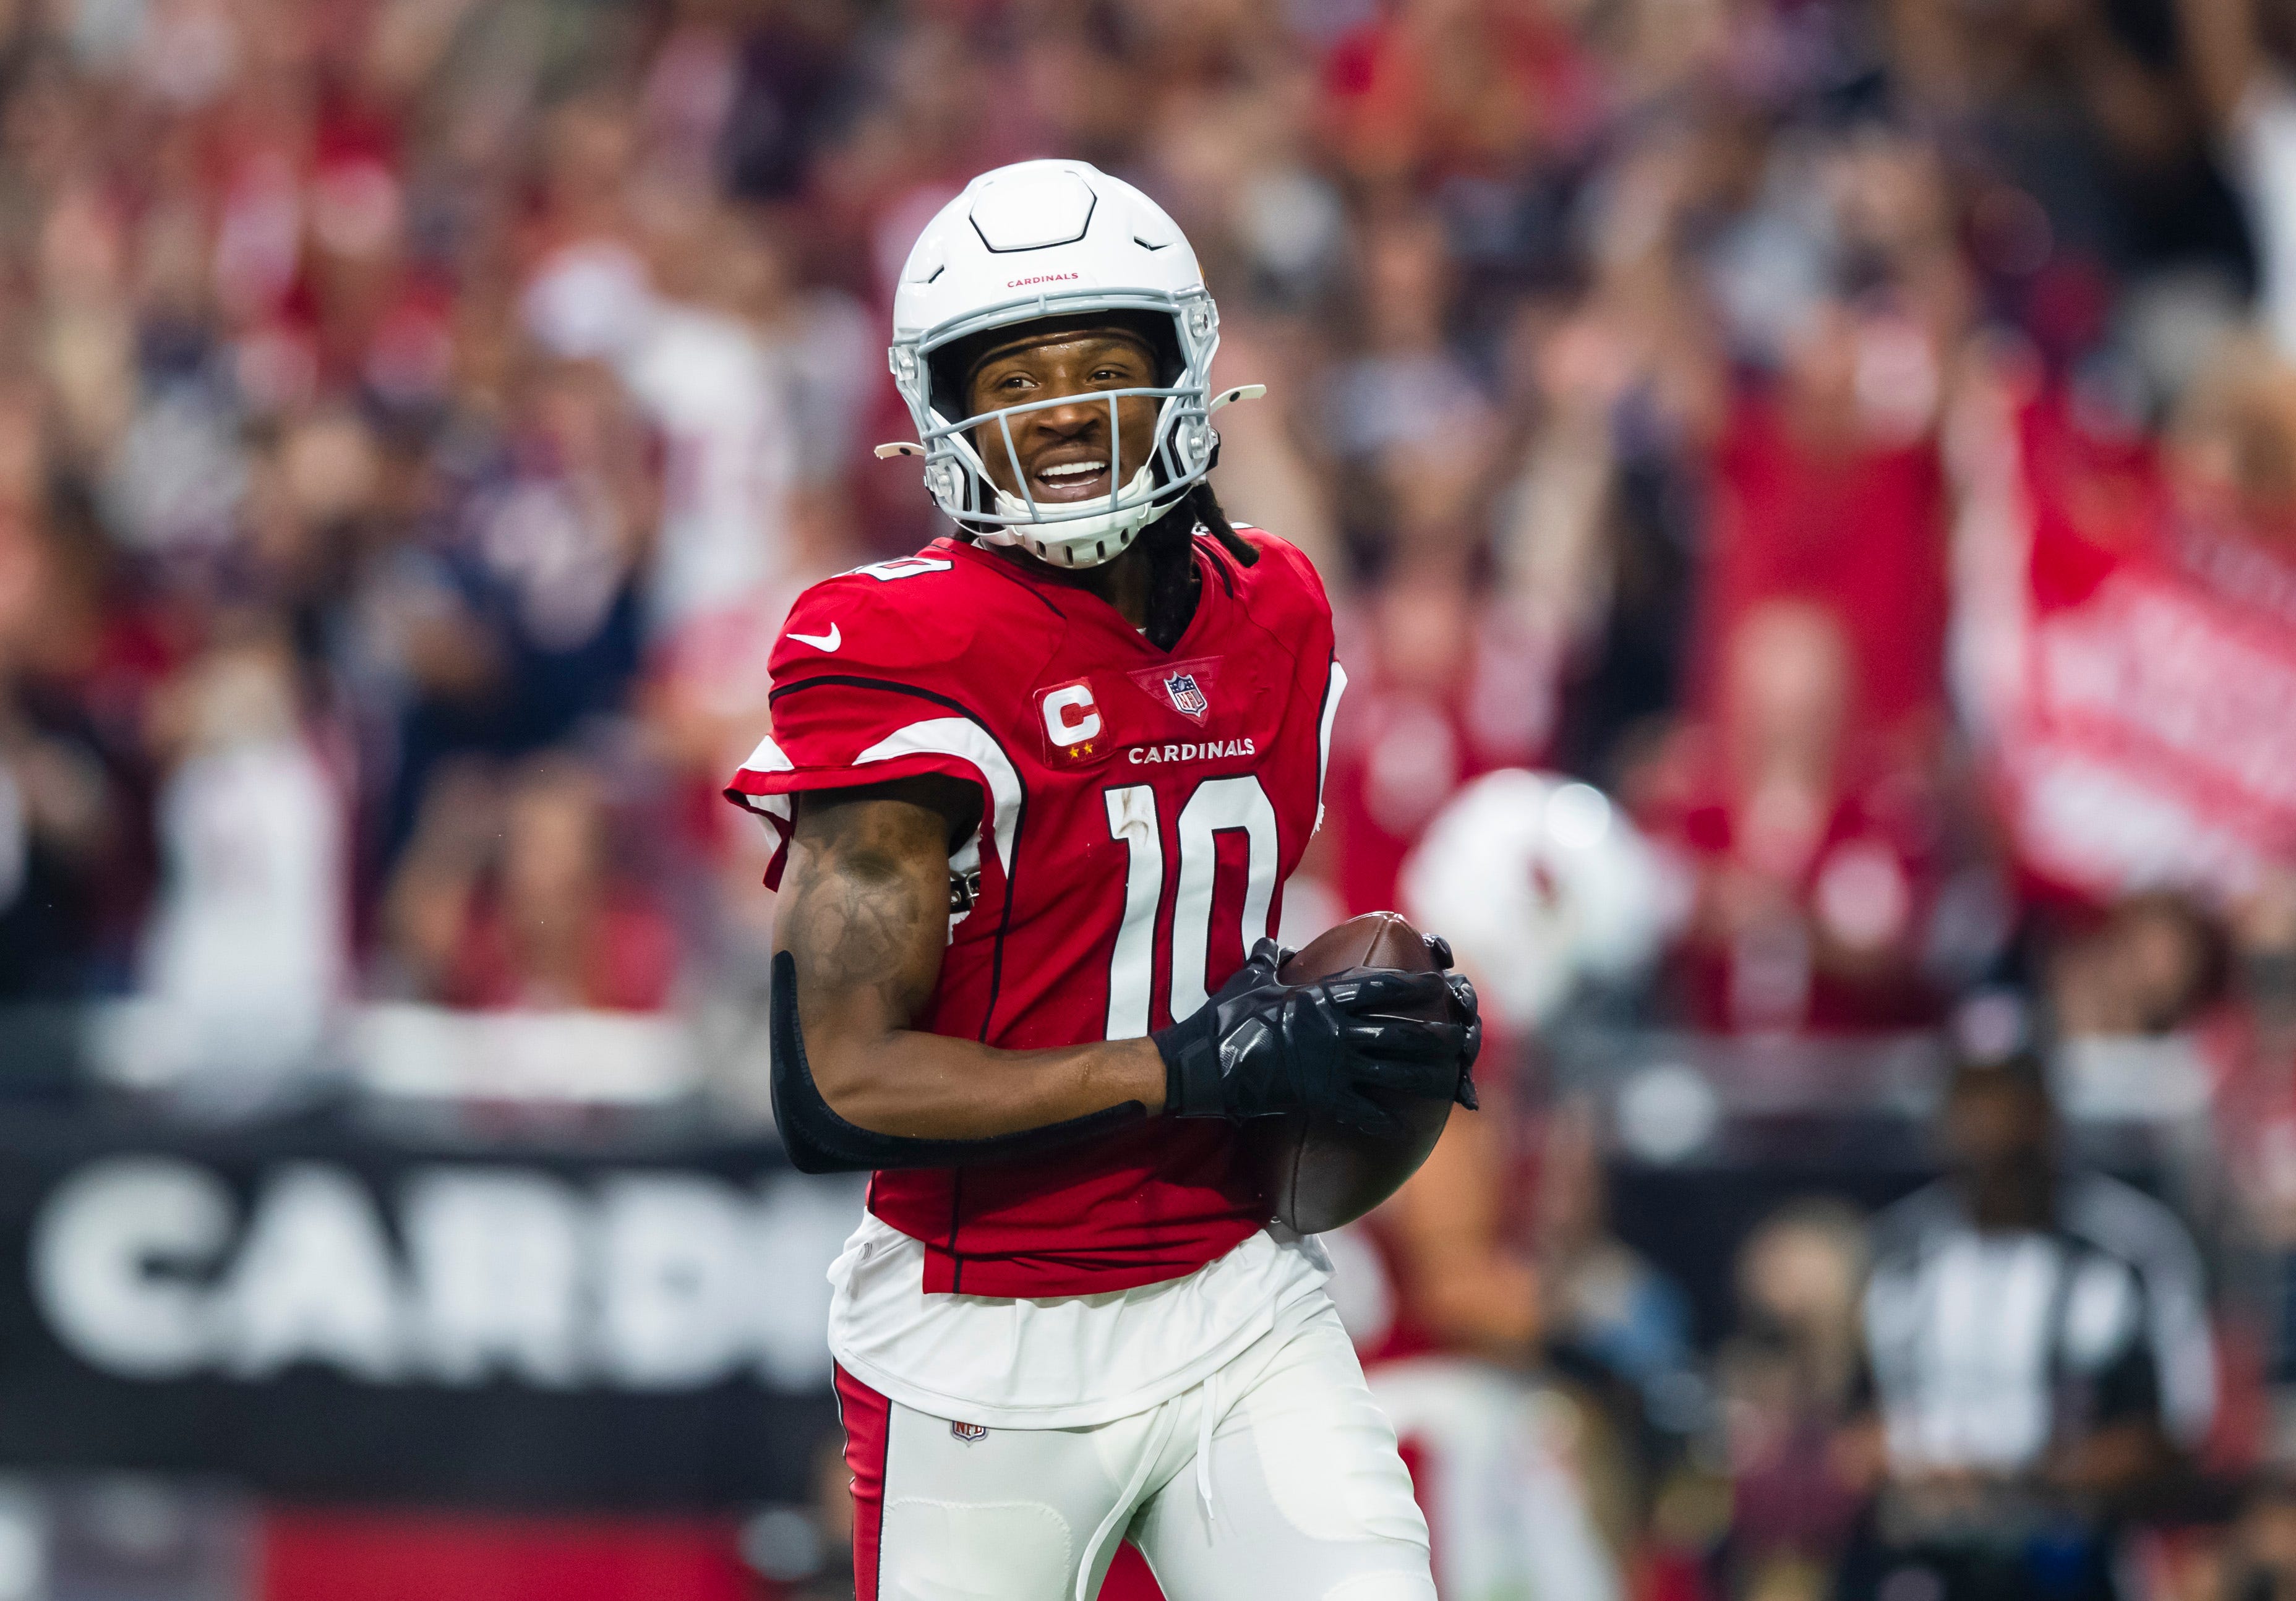 DeAndre Hopkins at Cardinals practice for first time since October